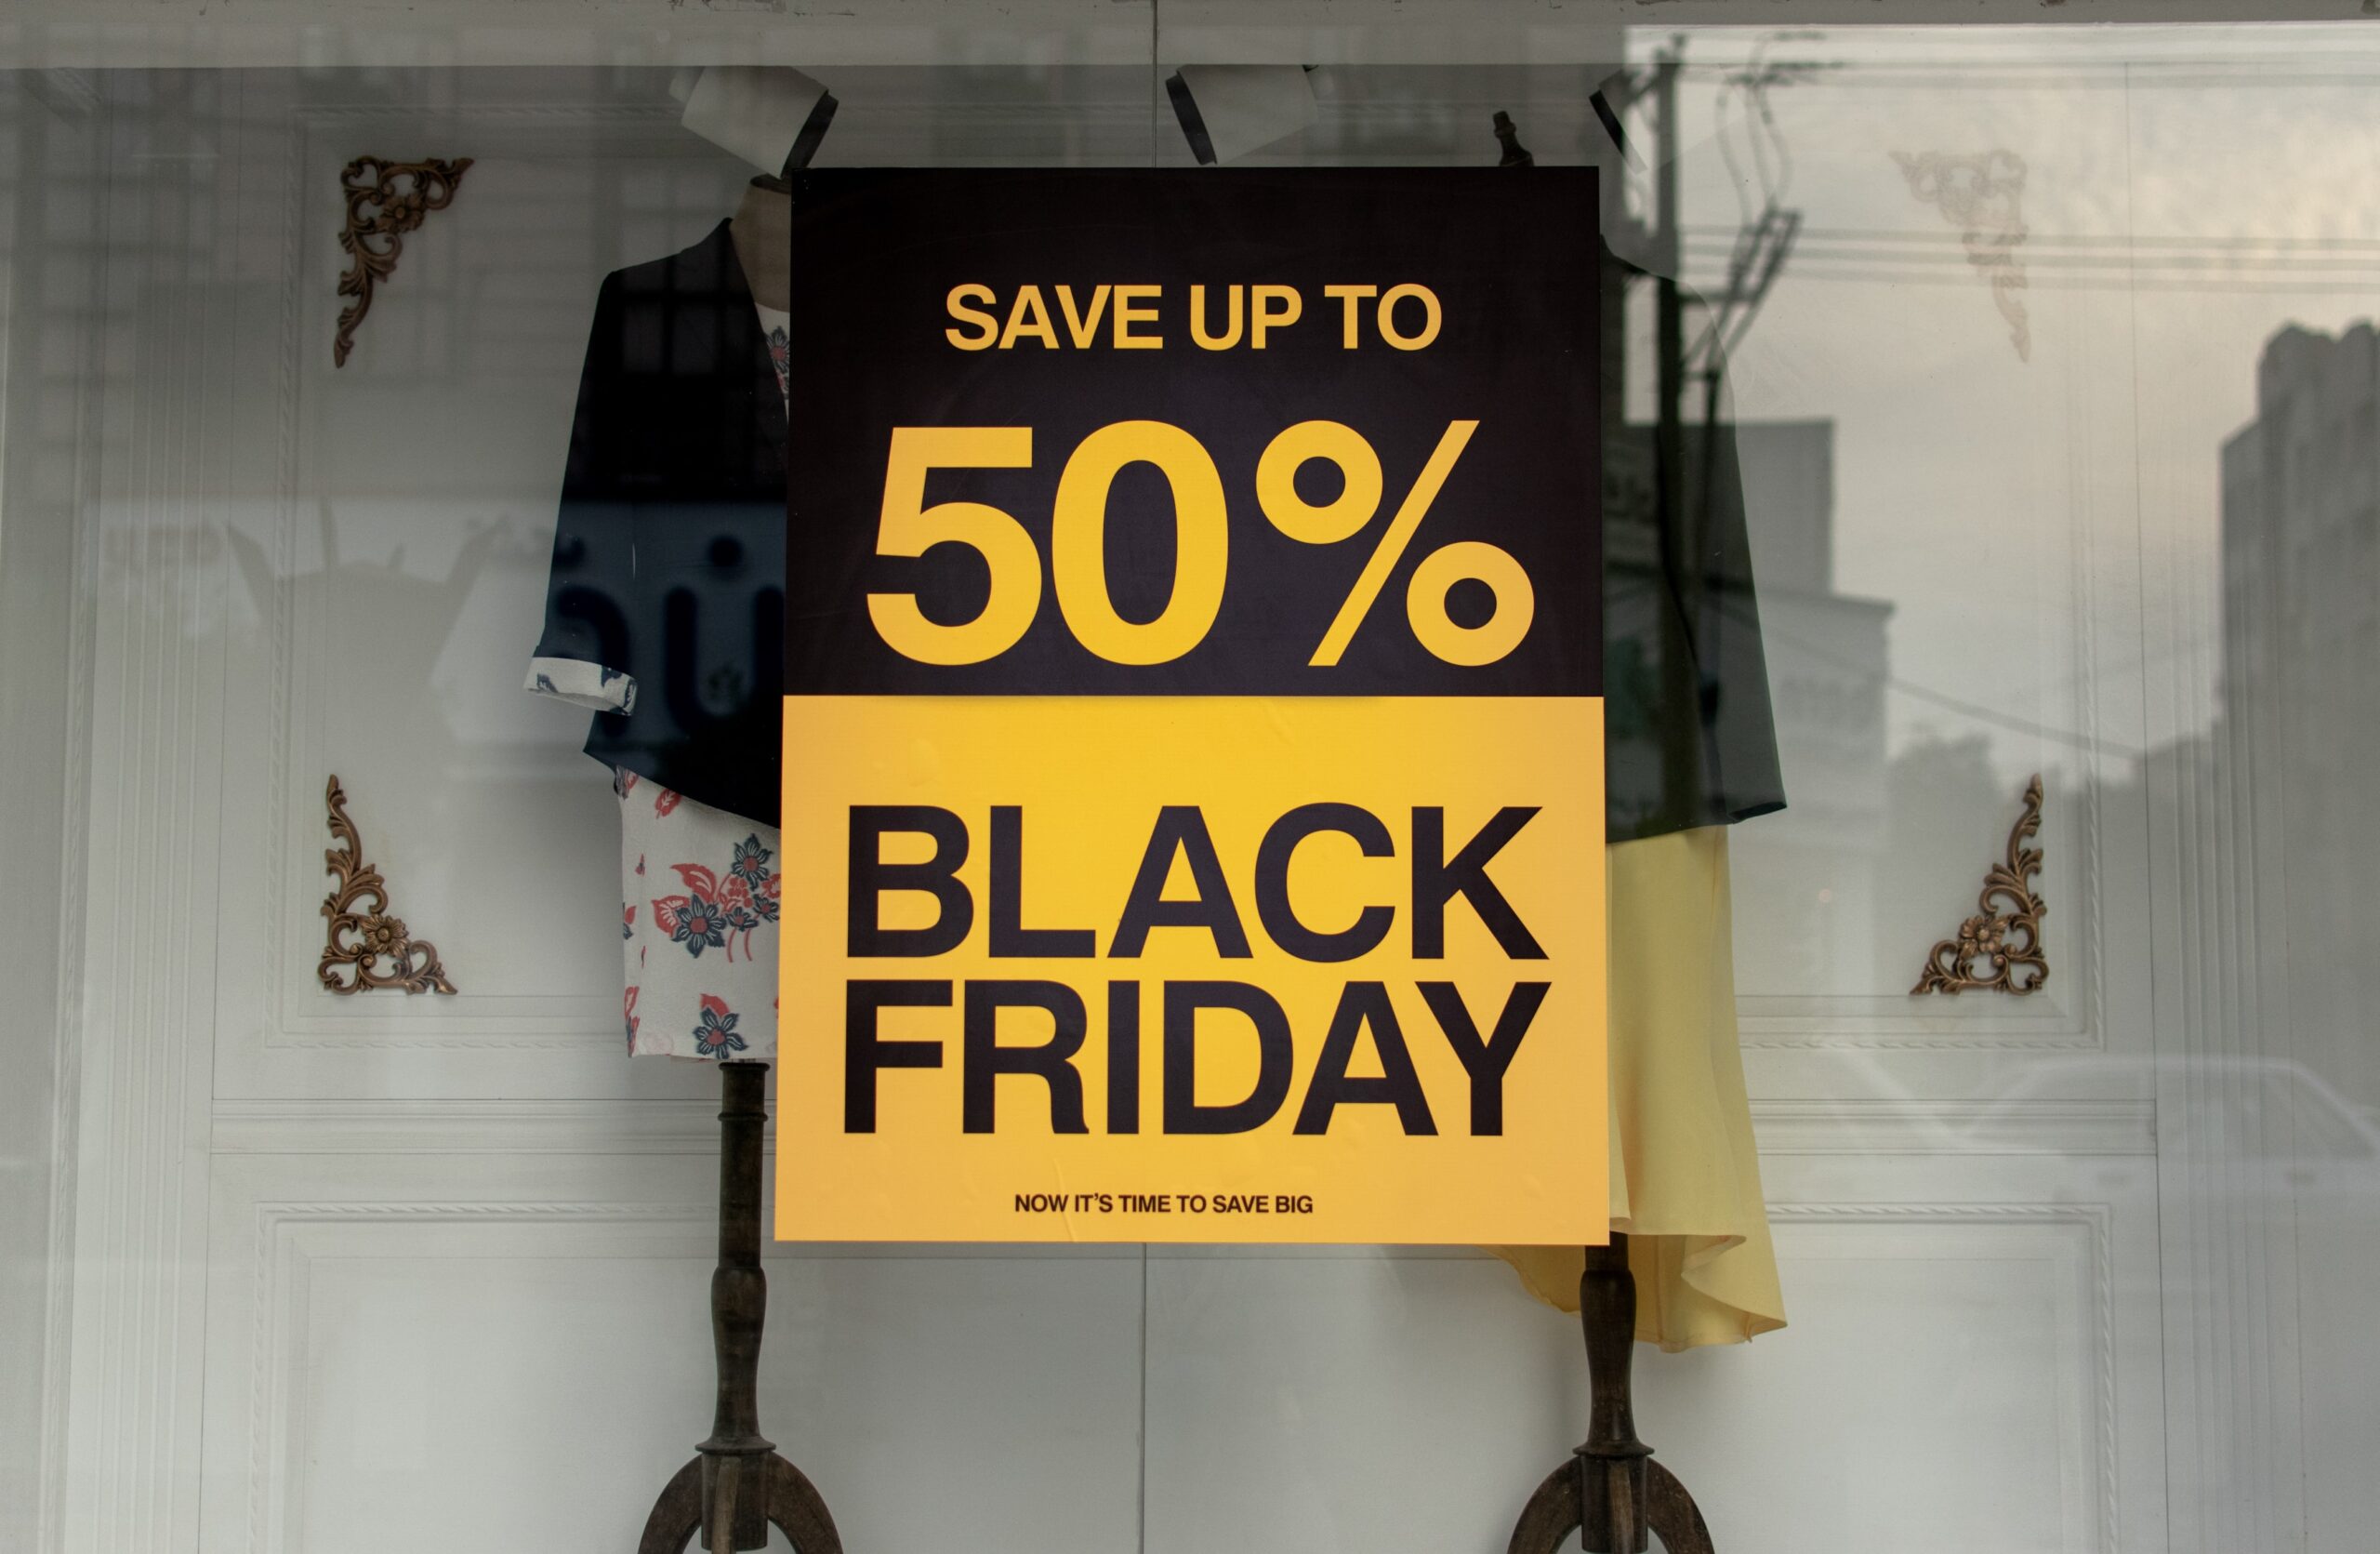 Why do we get FOMO from Black Friday?